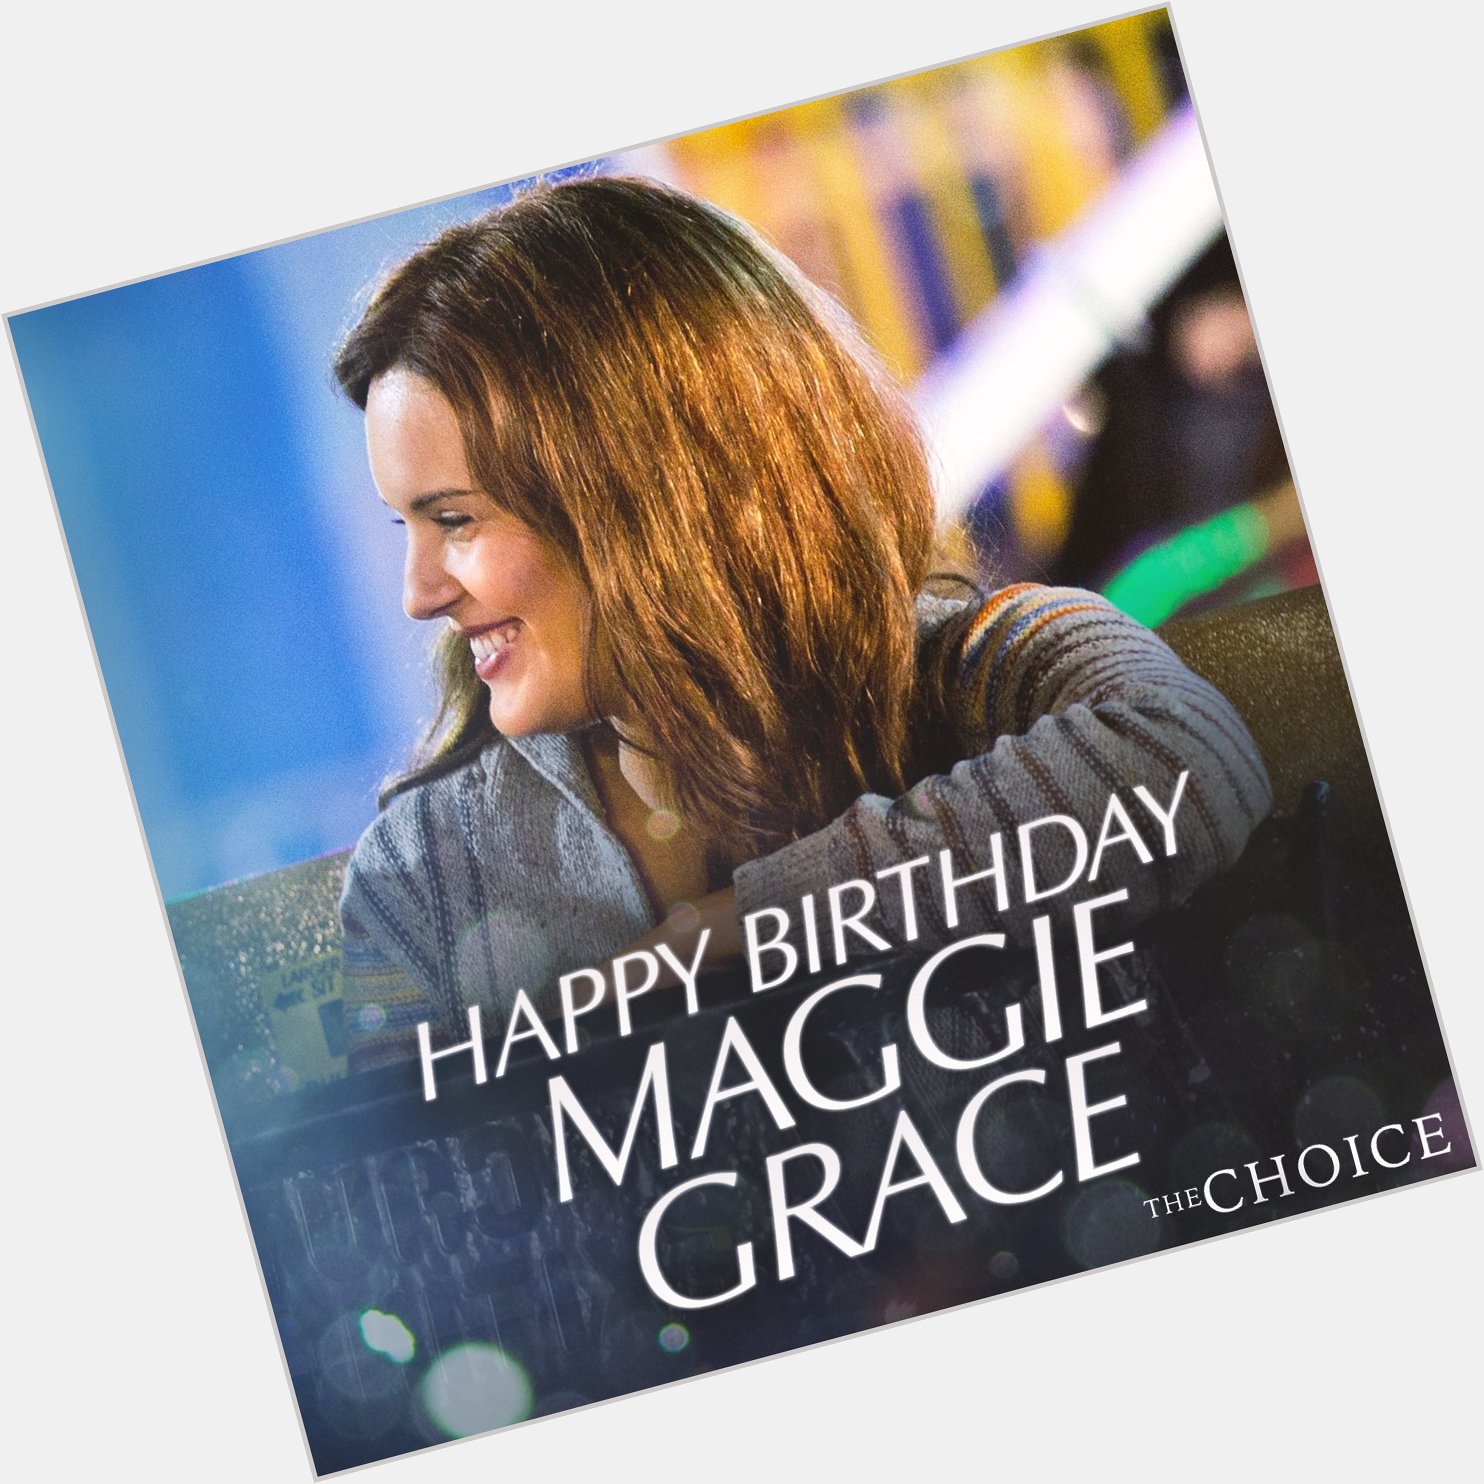 Join us in wishing the amazing Maggie Grace a happy birthday! 